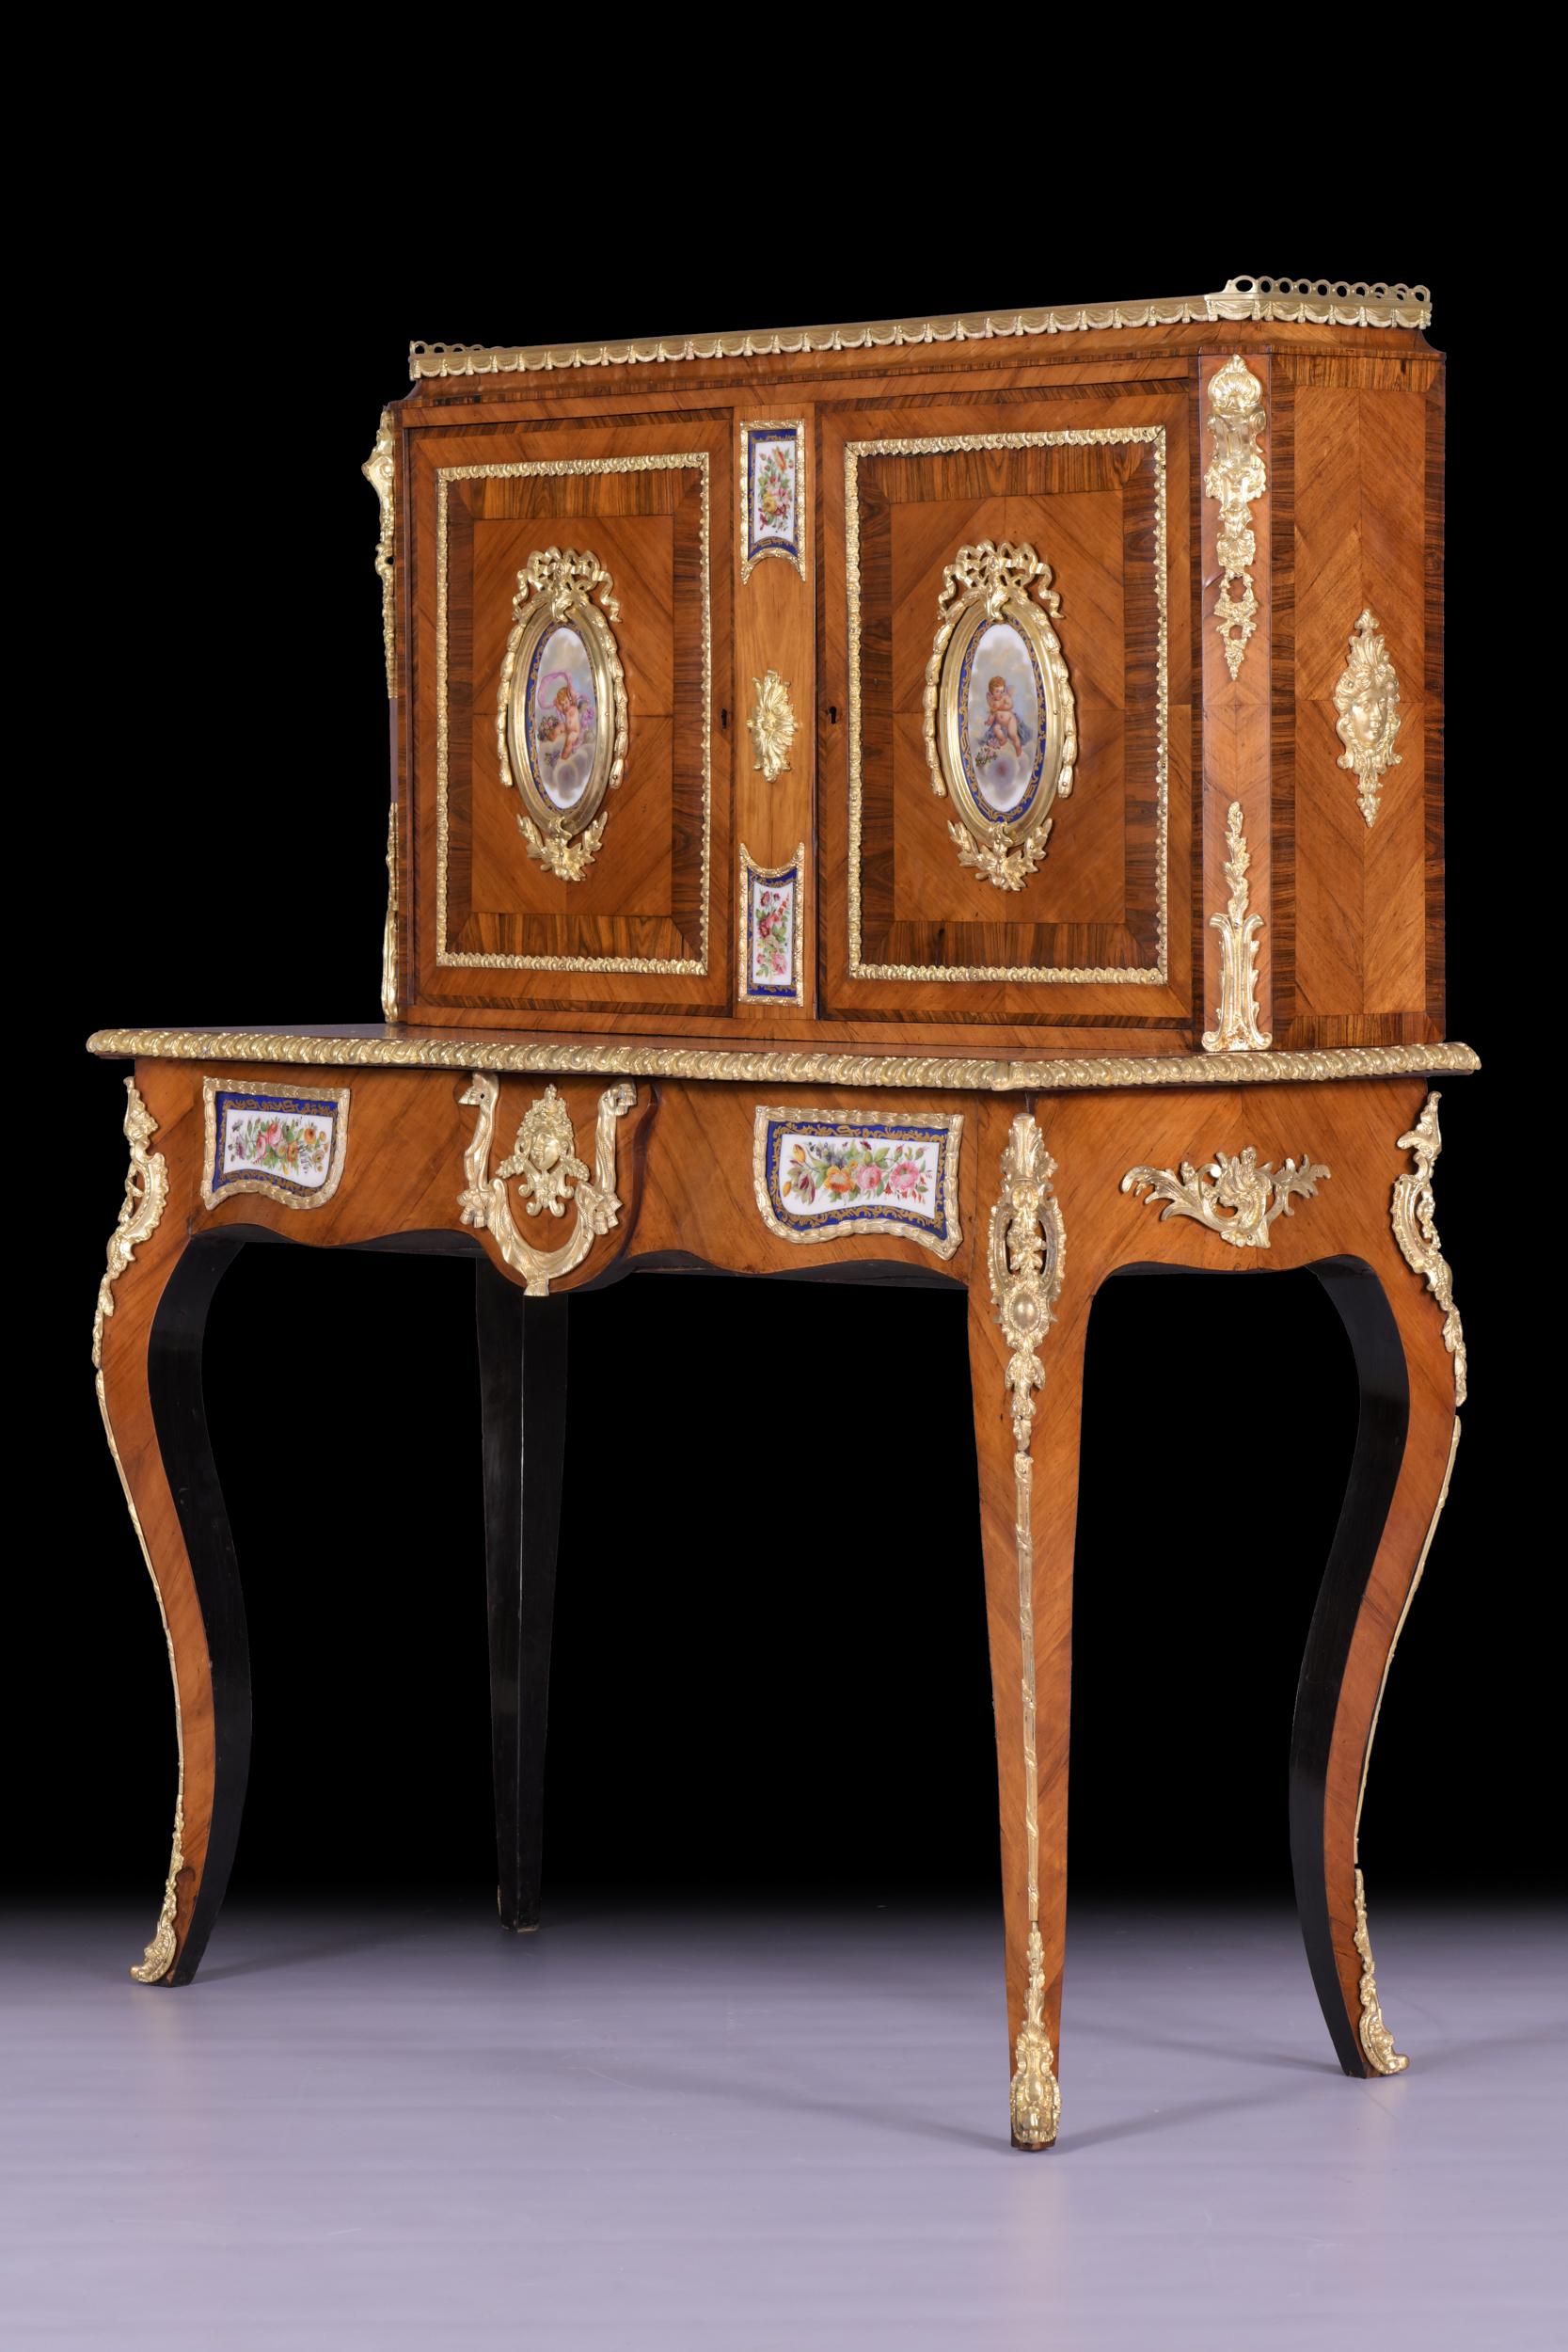 A very fine 19th century French Louis XV style Kingwood, Walnut and ormolu mounted Bonheur Du Jour, the superstructure fitted with twin panel door applied with oval 'Sevres' porcelain panels, enclosing shelved interior, the base supported on squared